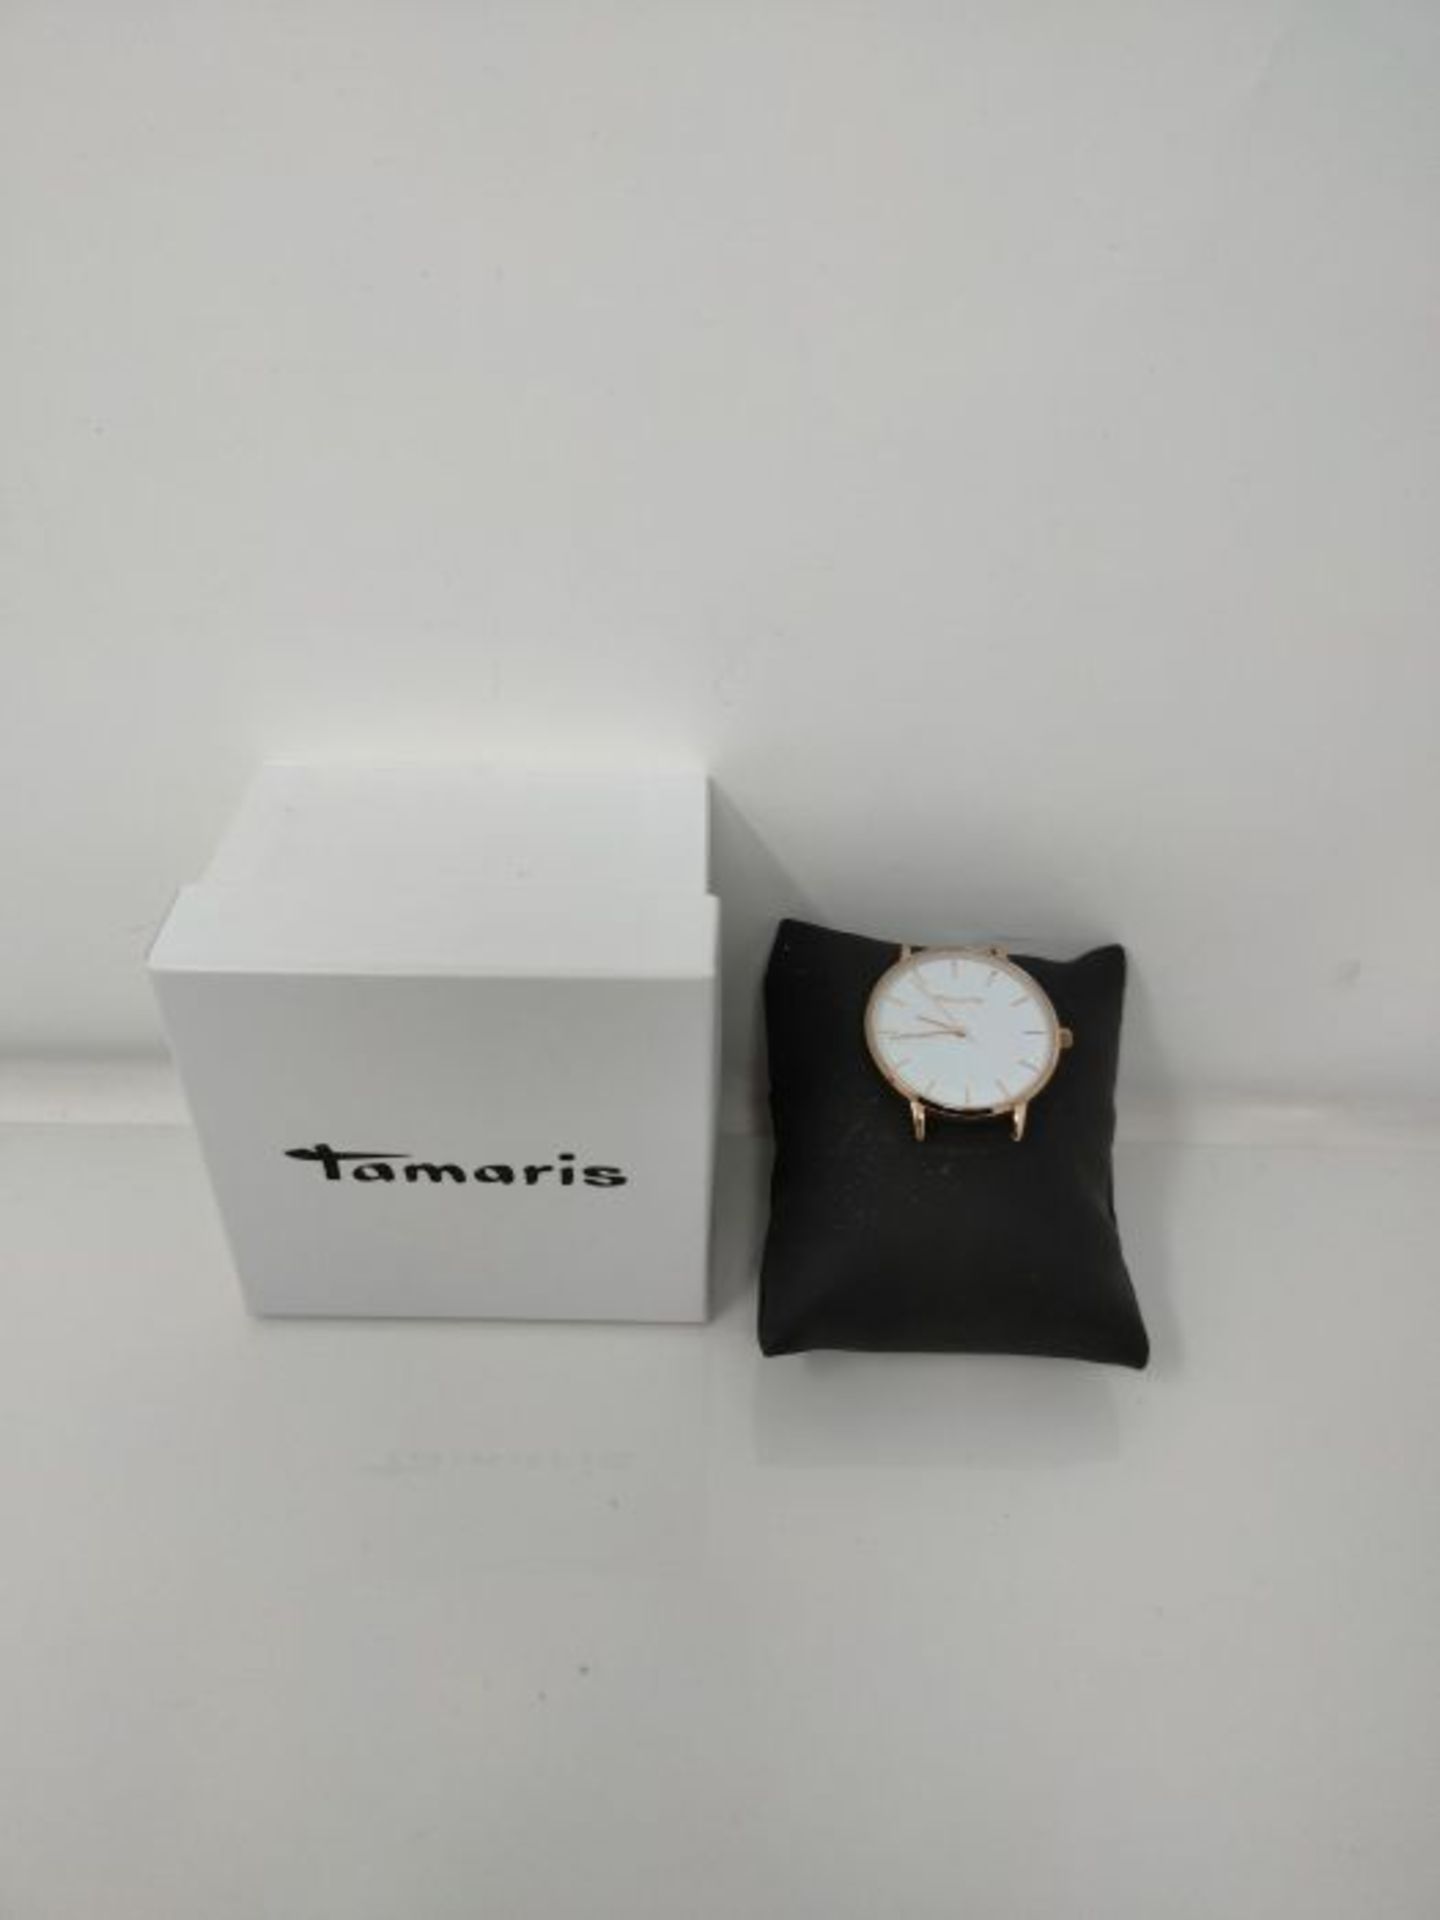 RRP £50.00 [INCOMPLETE] Tamaris Womens Analogue Quartz Watch with Leather Strap TT-0005-LQ - Image 2 of 3